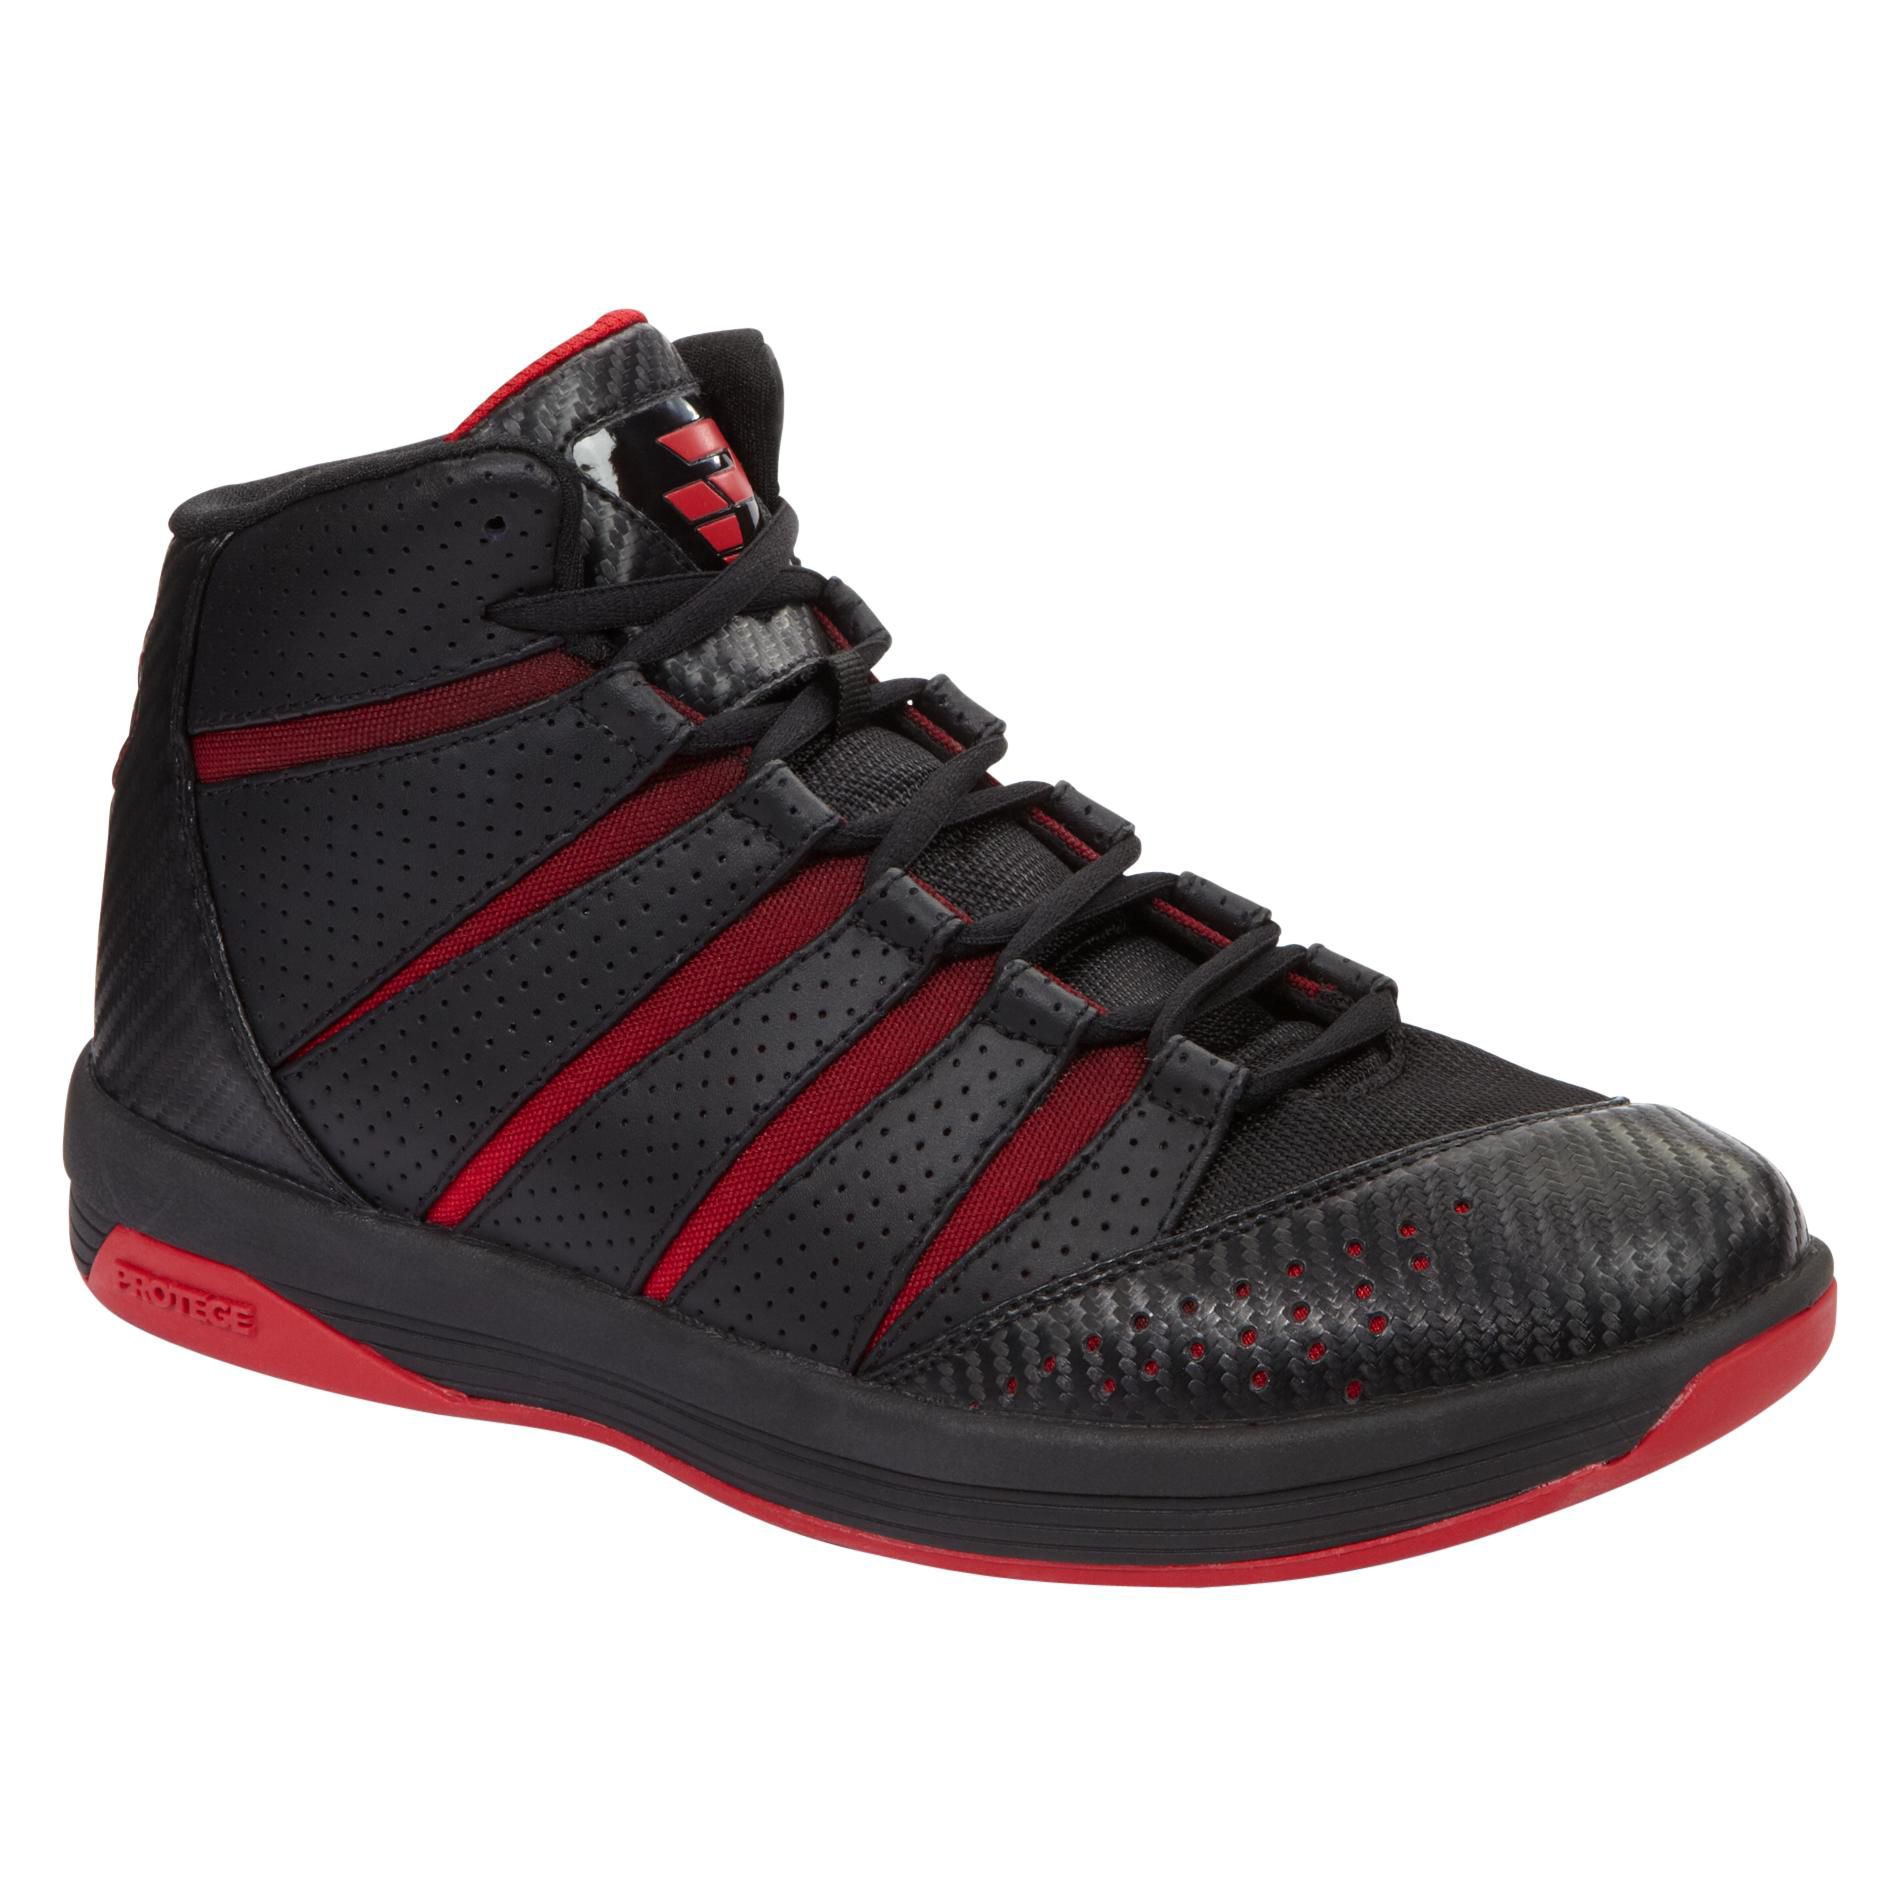 Protege Men's Glide Leather Basketball Sneaker - Avail up to size 16 - Black/Red